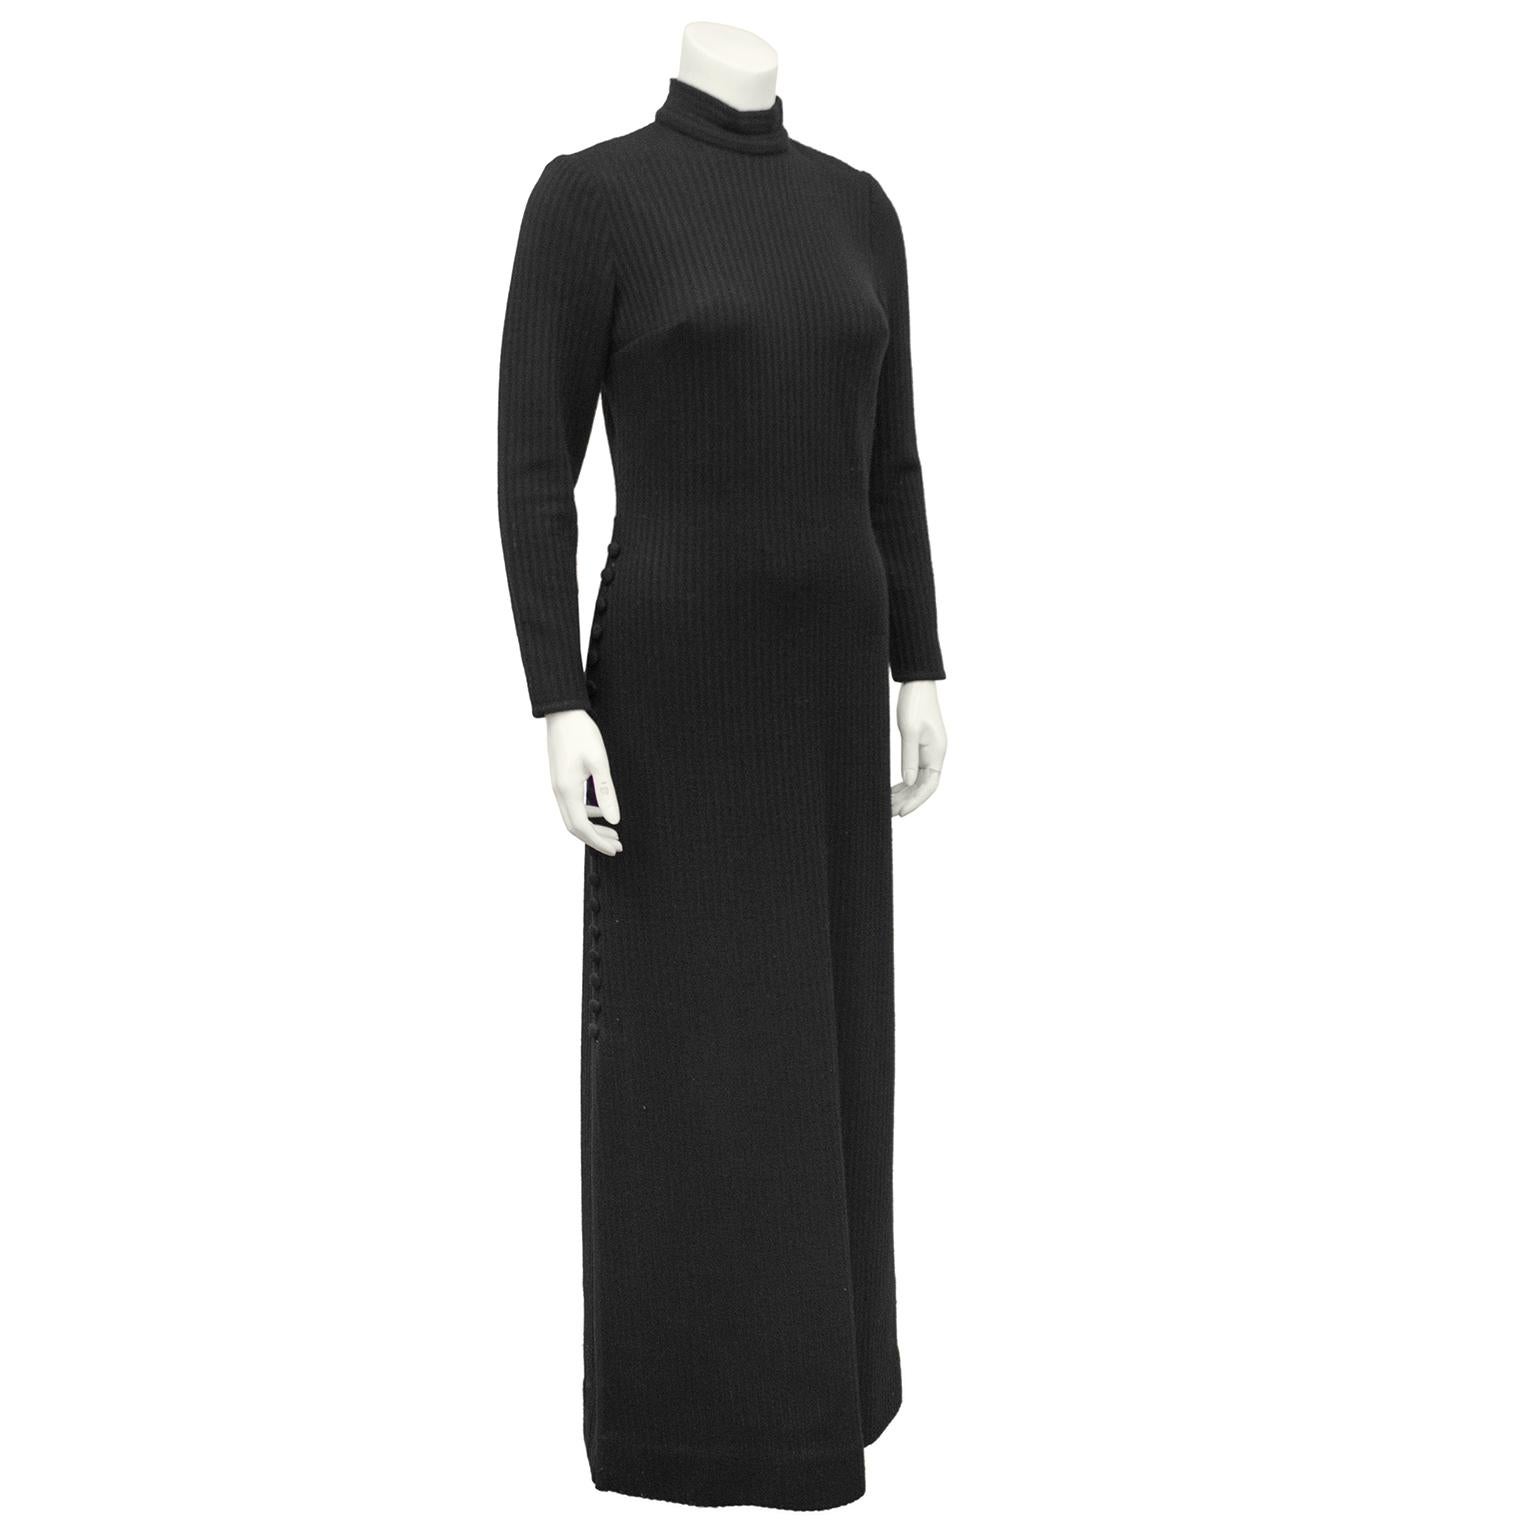 Stunning 1970's black ribbed body-con knit gown from Italian designer Lucia Knitting Mills. Mock neck, long sleeves with covered buttons down the left leg. Darts at bust. 19